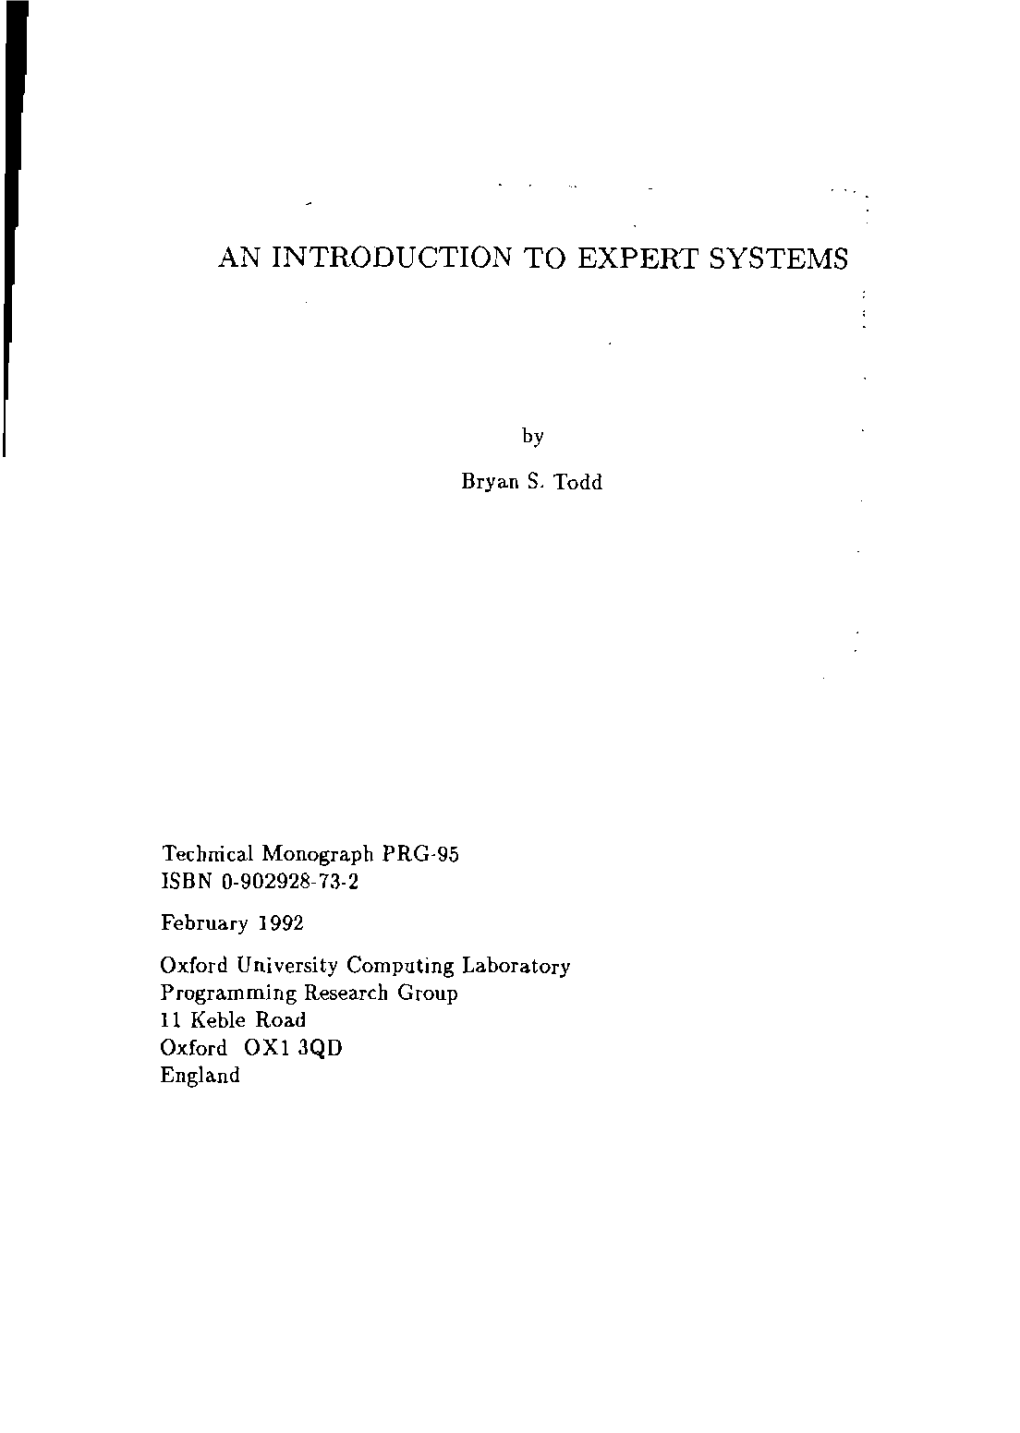 An Introduction to Expert Systems